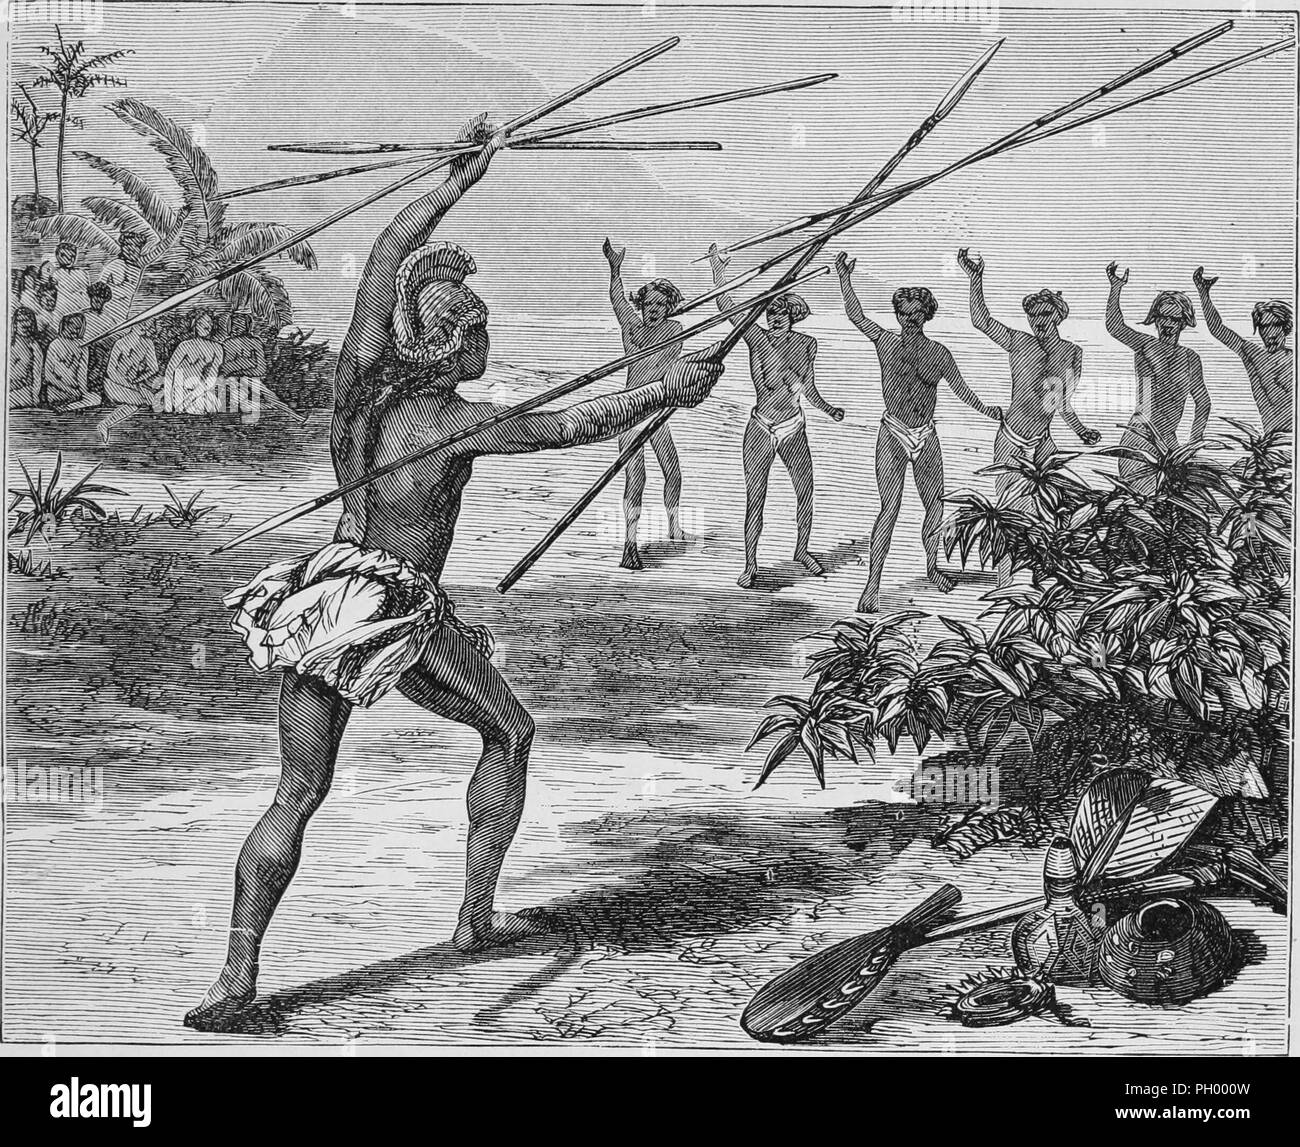 Black and white vintage print, depicting the Hawaiian King Kamehameha, wearing a mahiole (feathered helmet) and short tunic, performing a feat during which he defends himself against six simultaneously thrown spears, by deflecting three with his own spear and catching the other three in his other hand, published in John George Wood's volume 'The uncivilized races of men in all countries of the world, being a comprehensive account of their manners and customs, and of their physical, social, mental, moral and religious characteristics', 1877. Courtesy Internet Archive. () Stock Photo